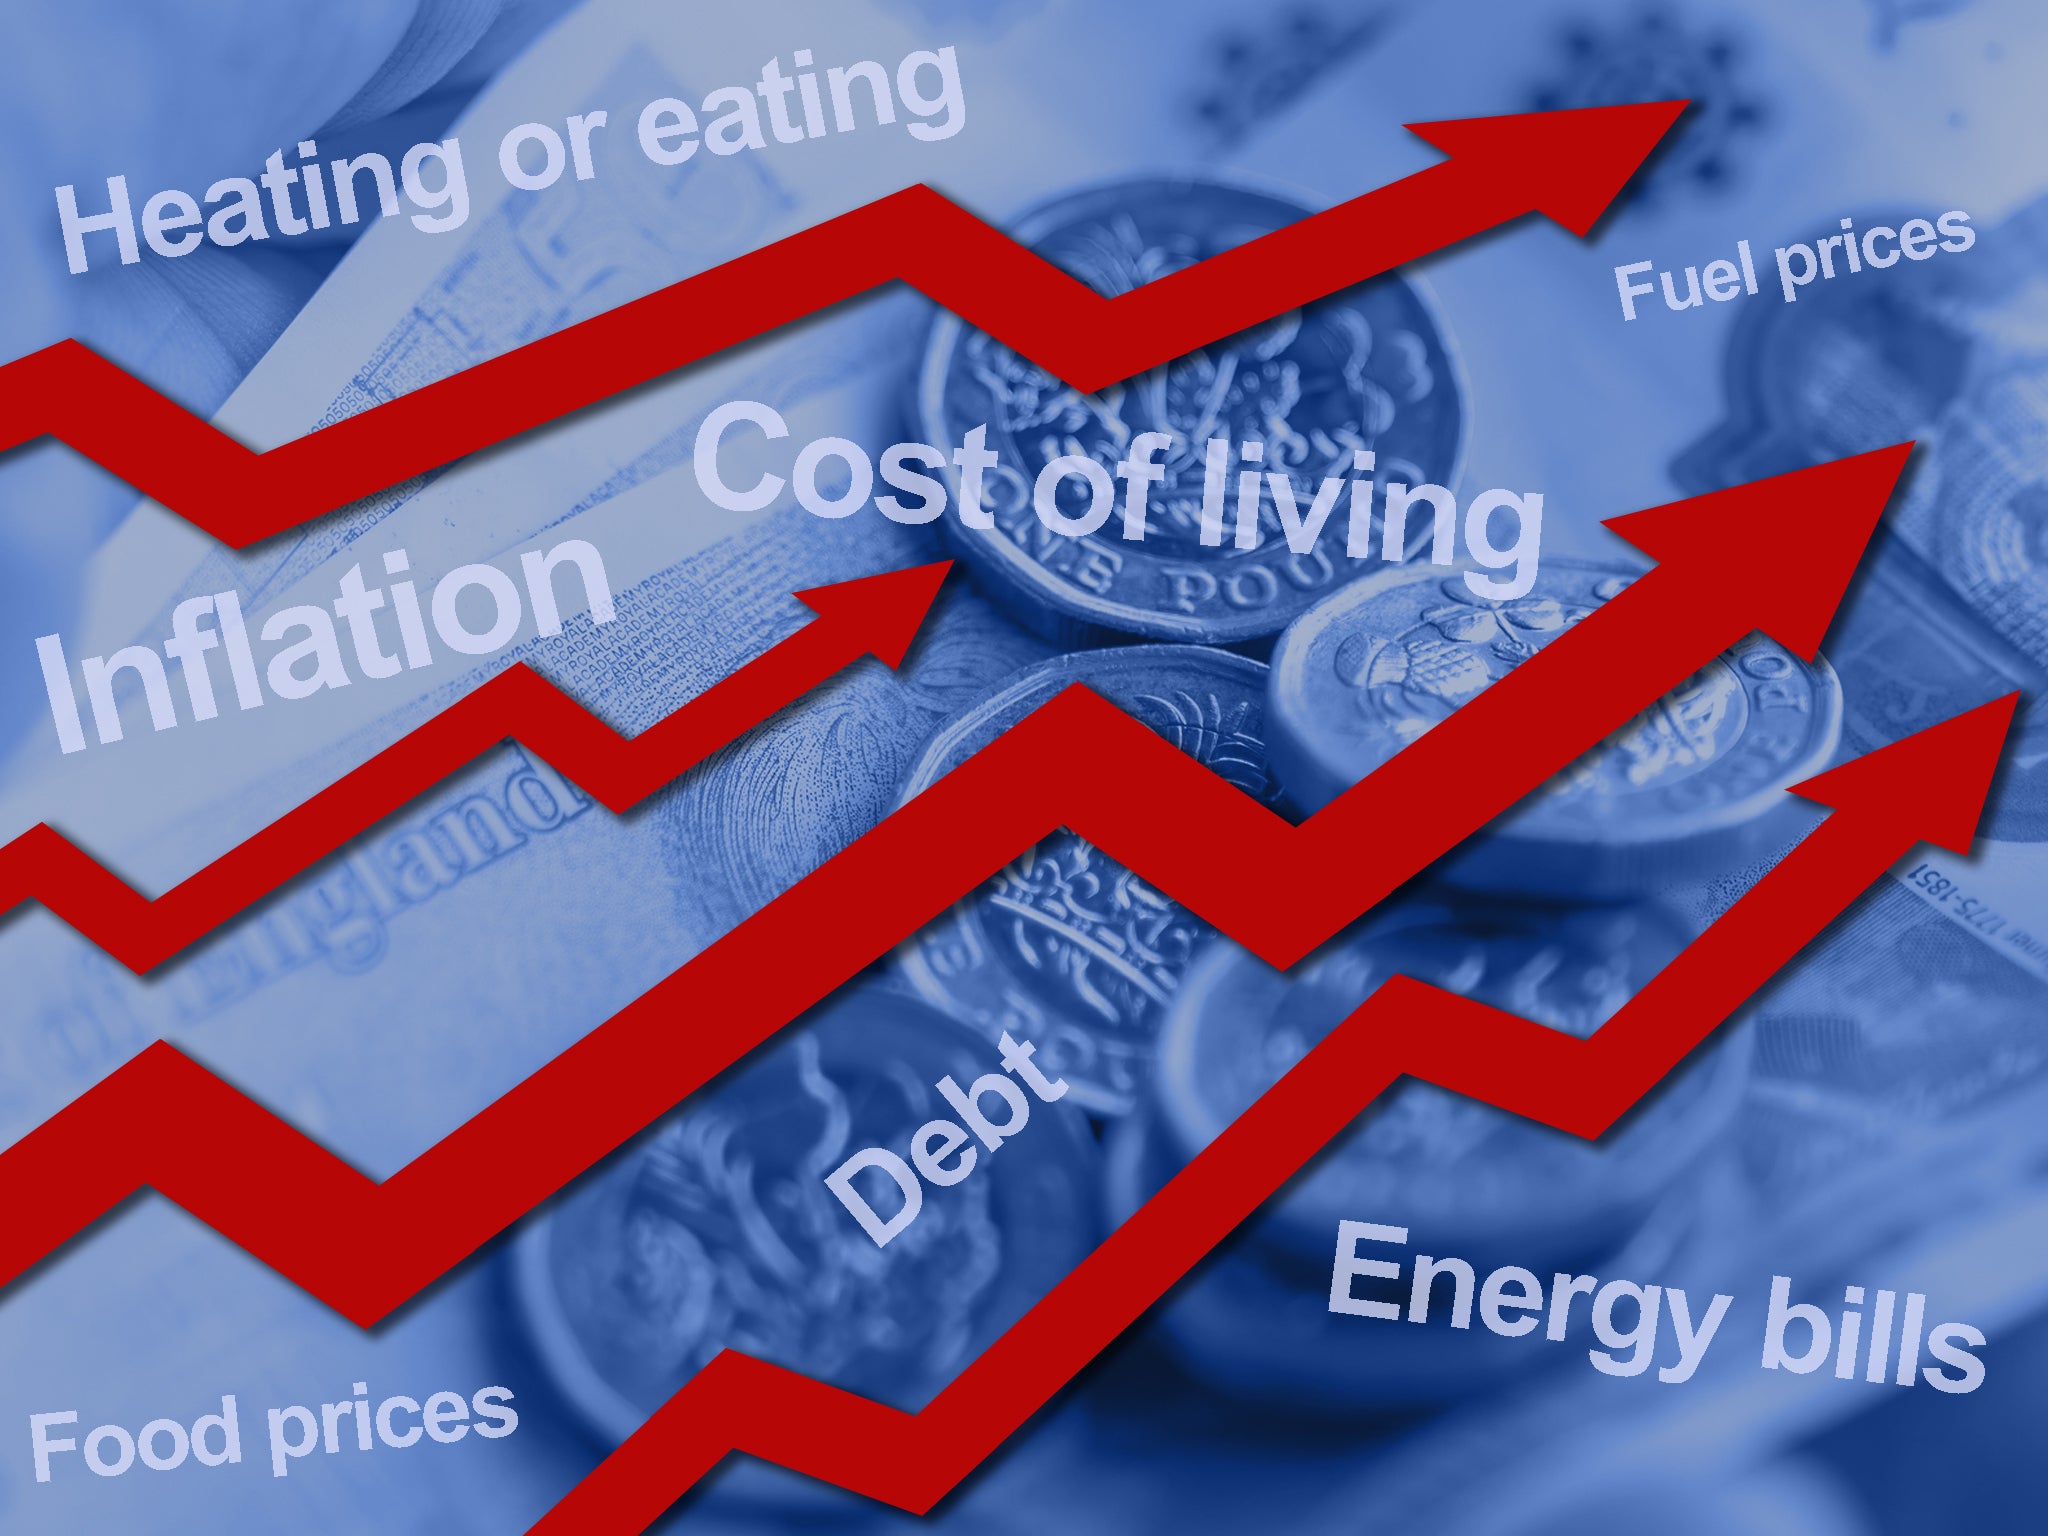 Annual energy bills are set to rise from £1,971 to £3,582 from October.